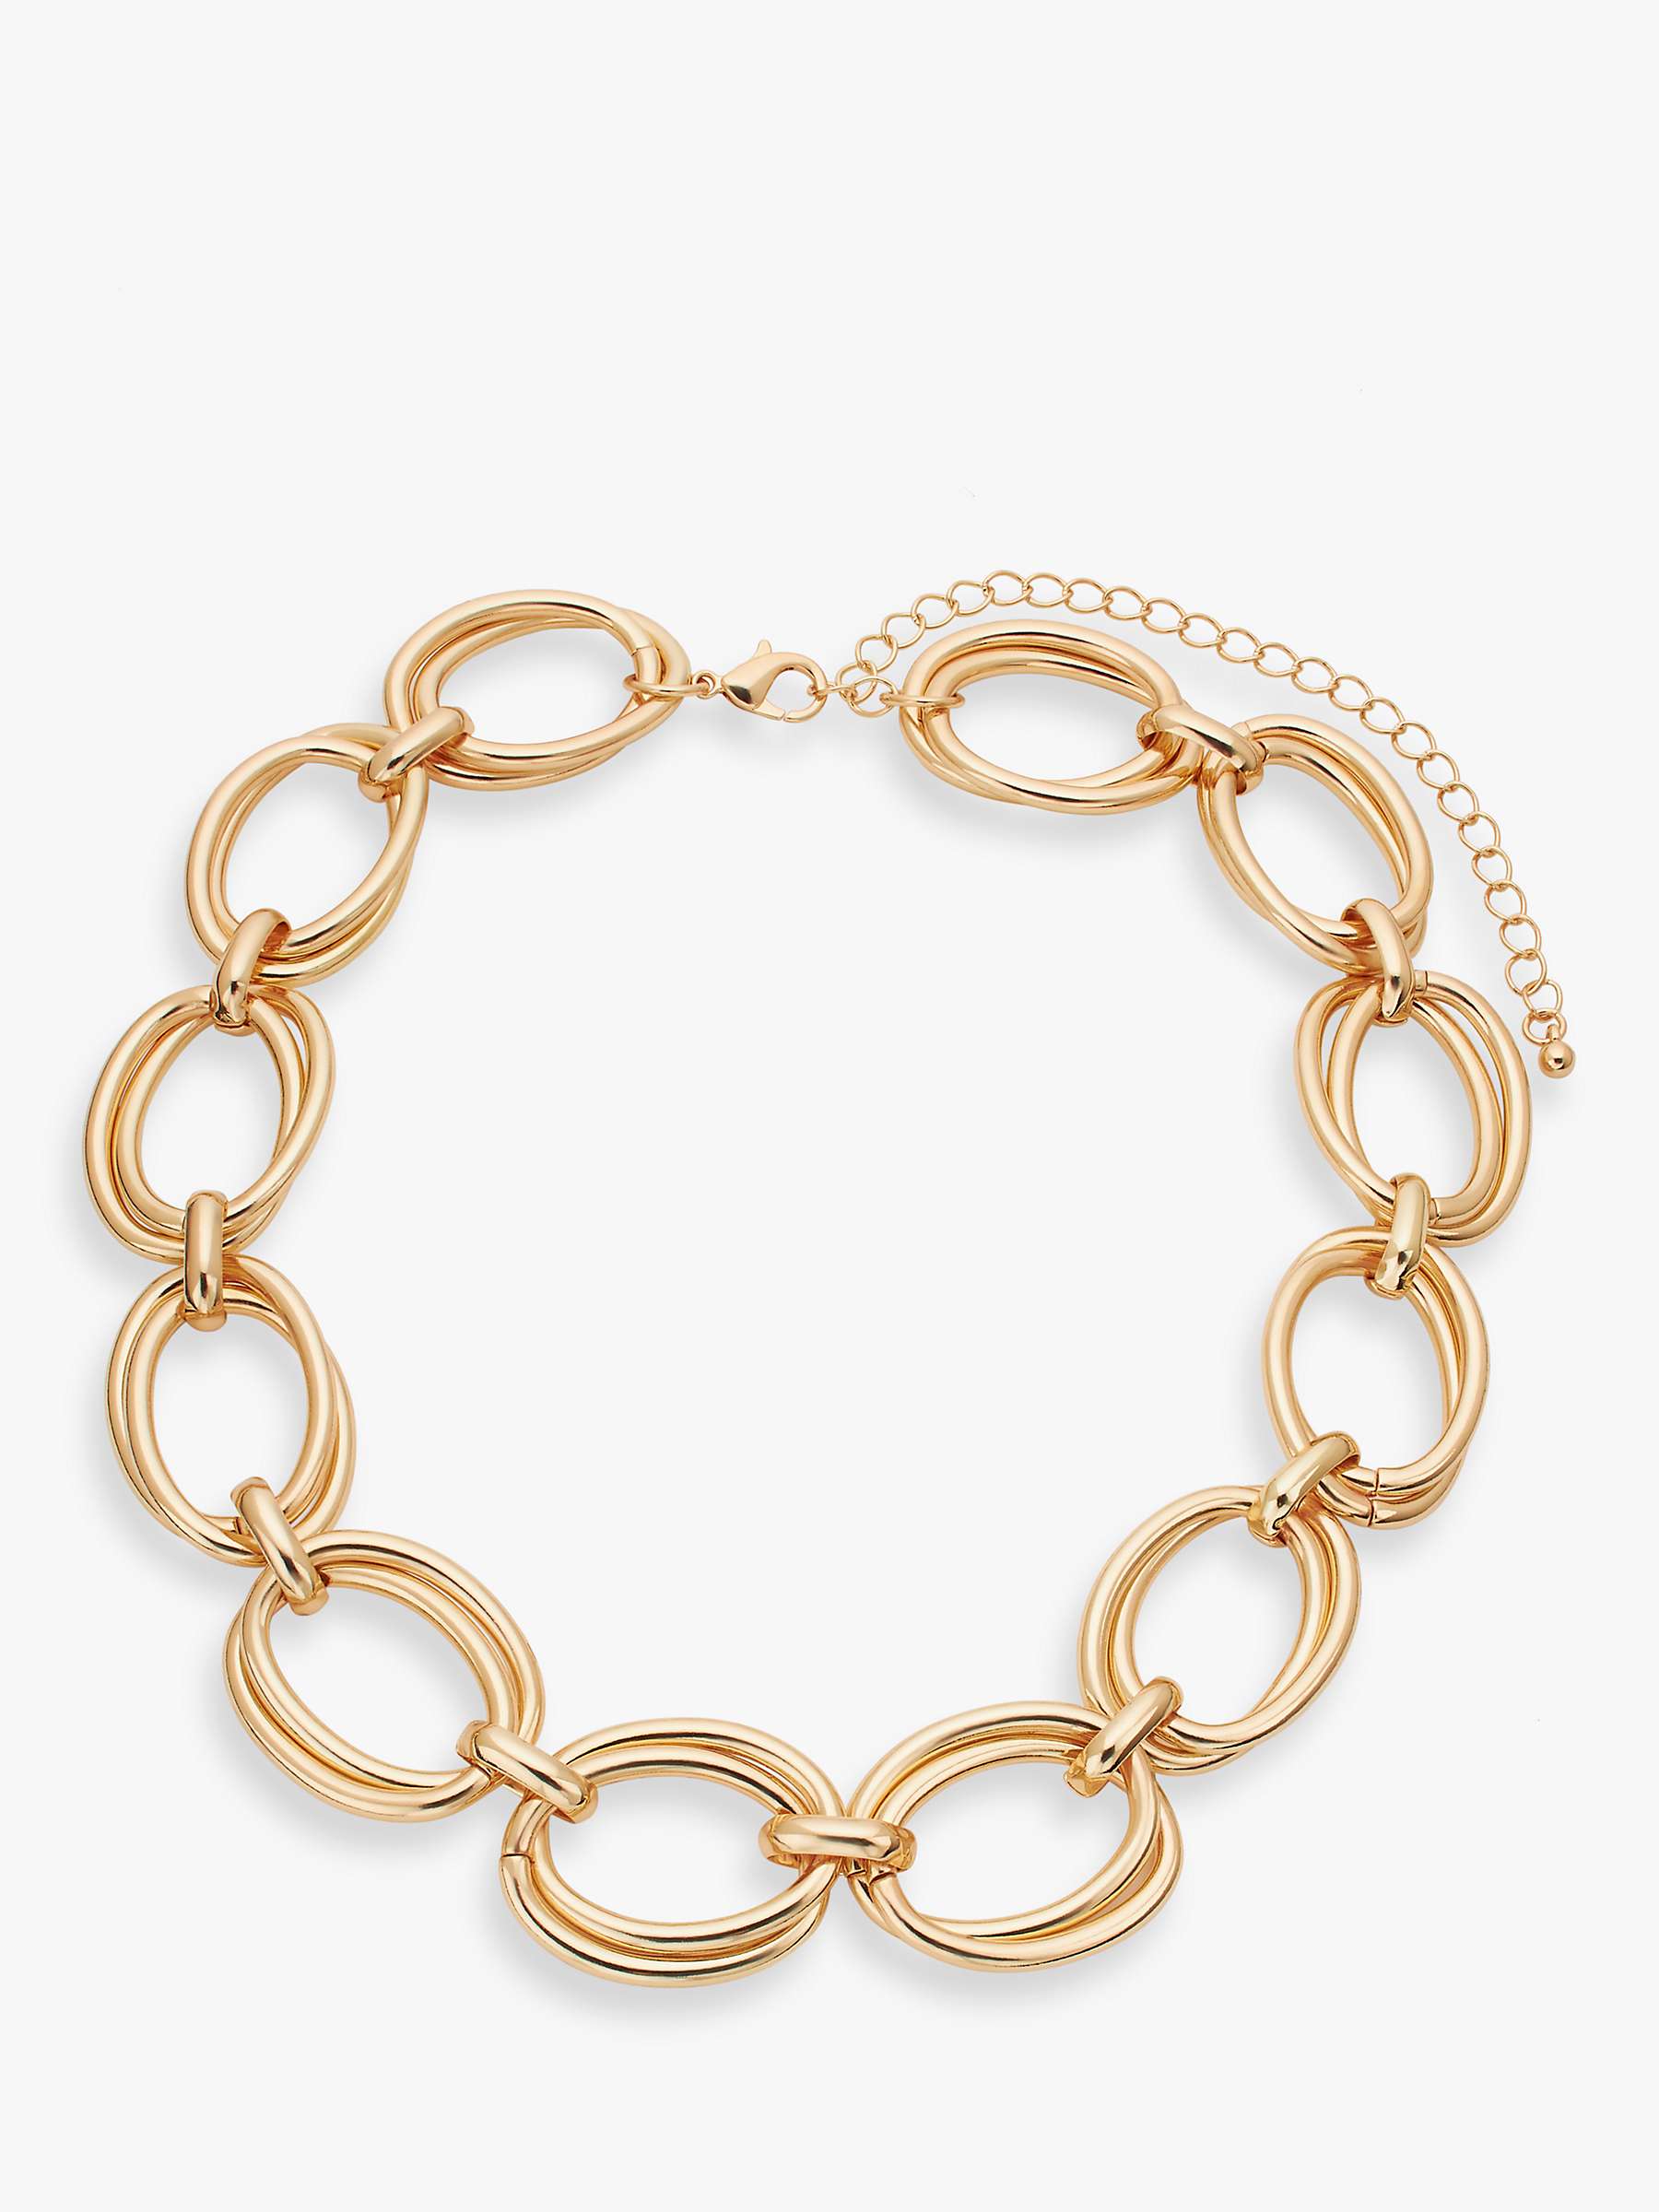 Buy John Lewis Statement Double Oval Link Necklace Online at johnlewis.com